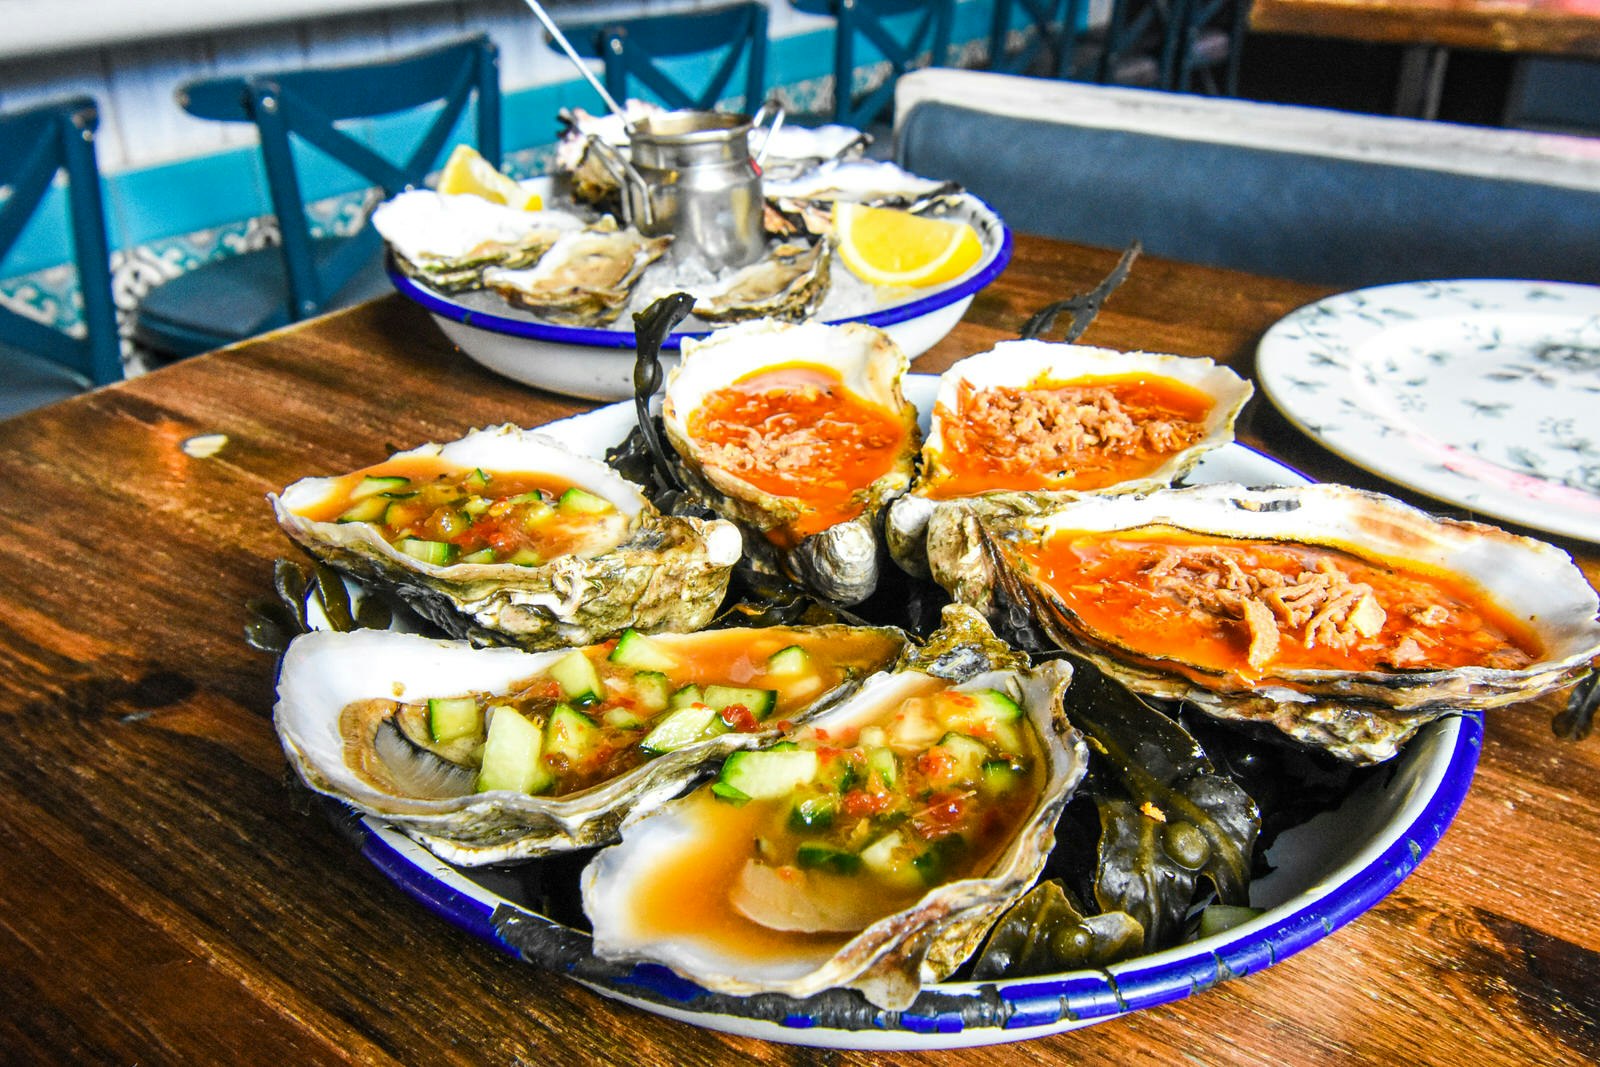 Klaw Seafood Cafe Dressed Oysters arranged on a plate